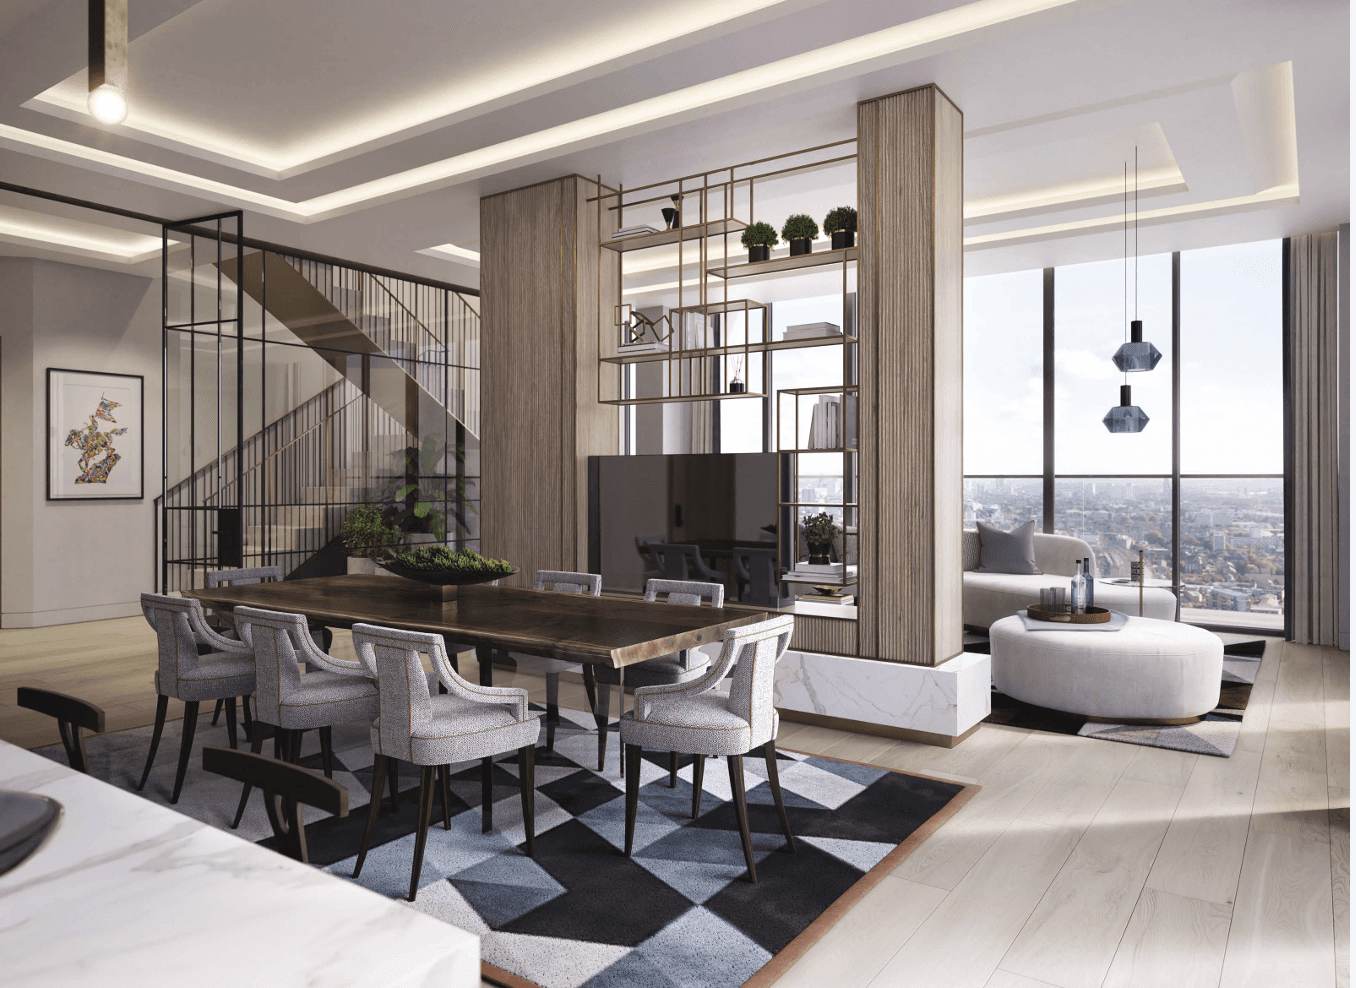 4 BEDROOM DUPLEX PENTHOUSE SITUATED ON THE 36TH/37TH FLOOR - THE STAGE, SHOREDITCH